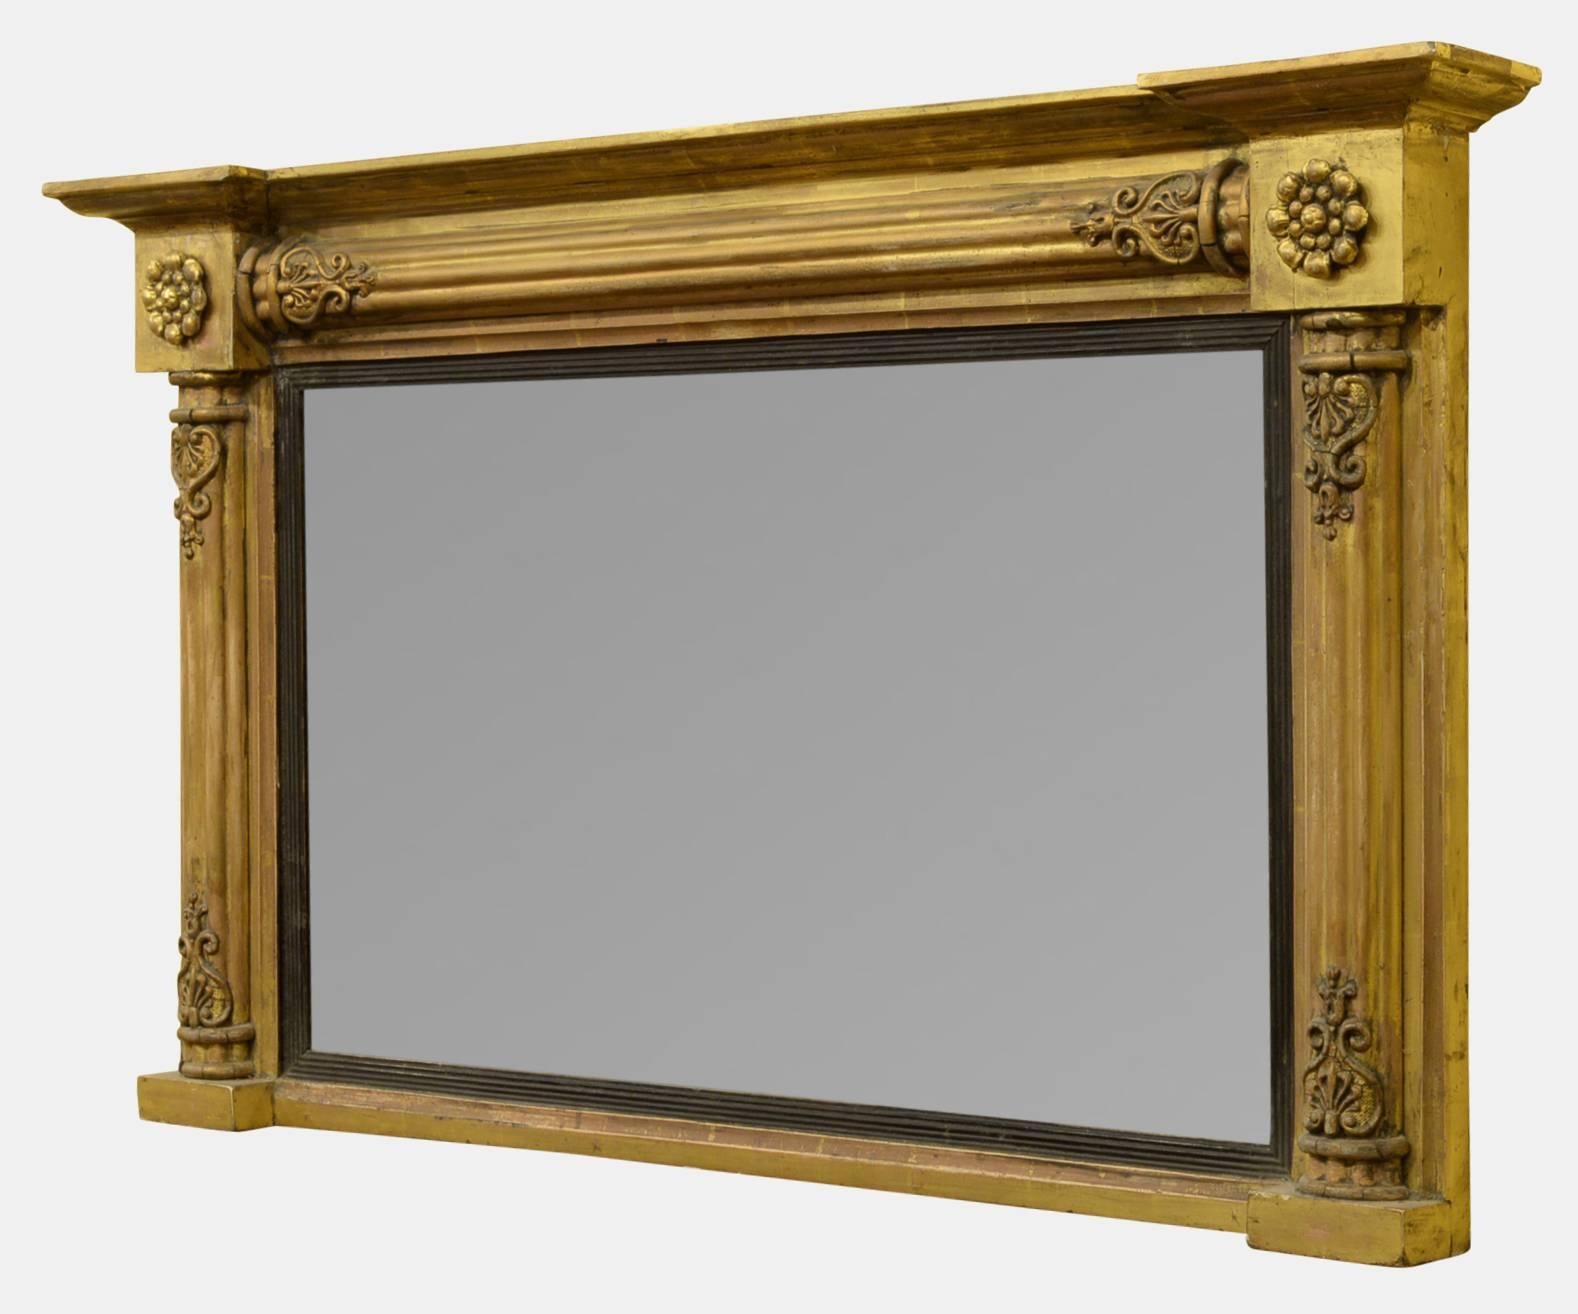 A William IV gilded overmantel mirror with lobed column decoration and rosettes to corners, with original plate,

circa 1835.

